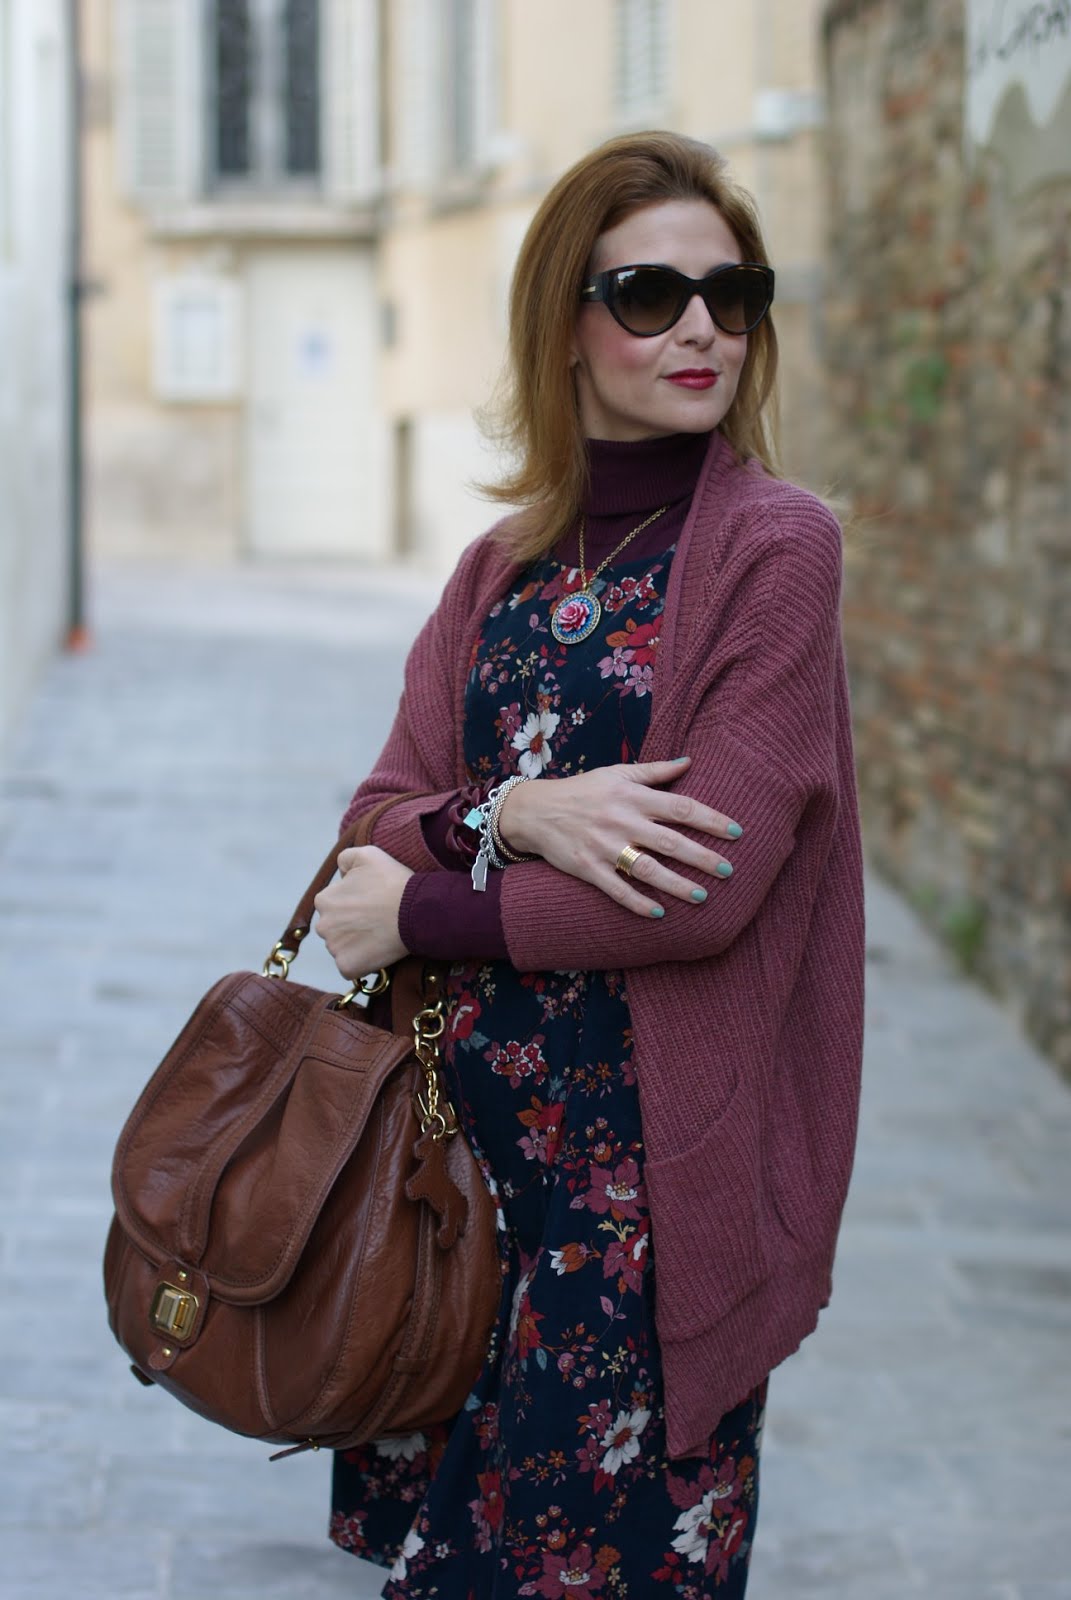 Vintage style: flower dress and cat eye sunglasses ! | Fashion and ...